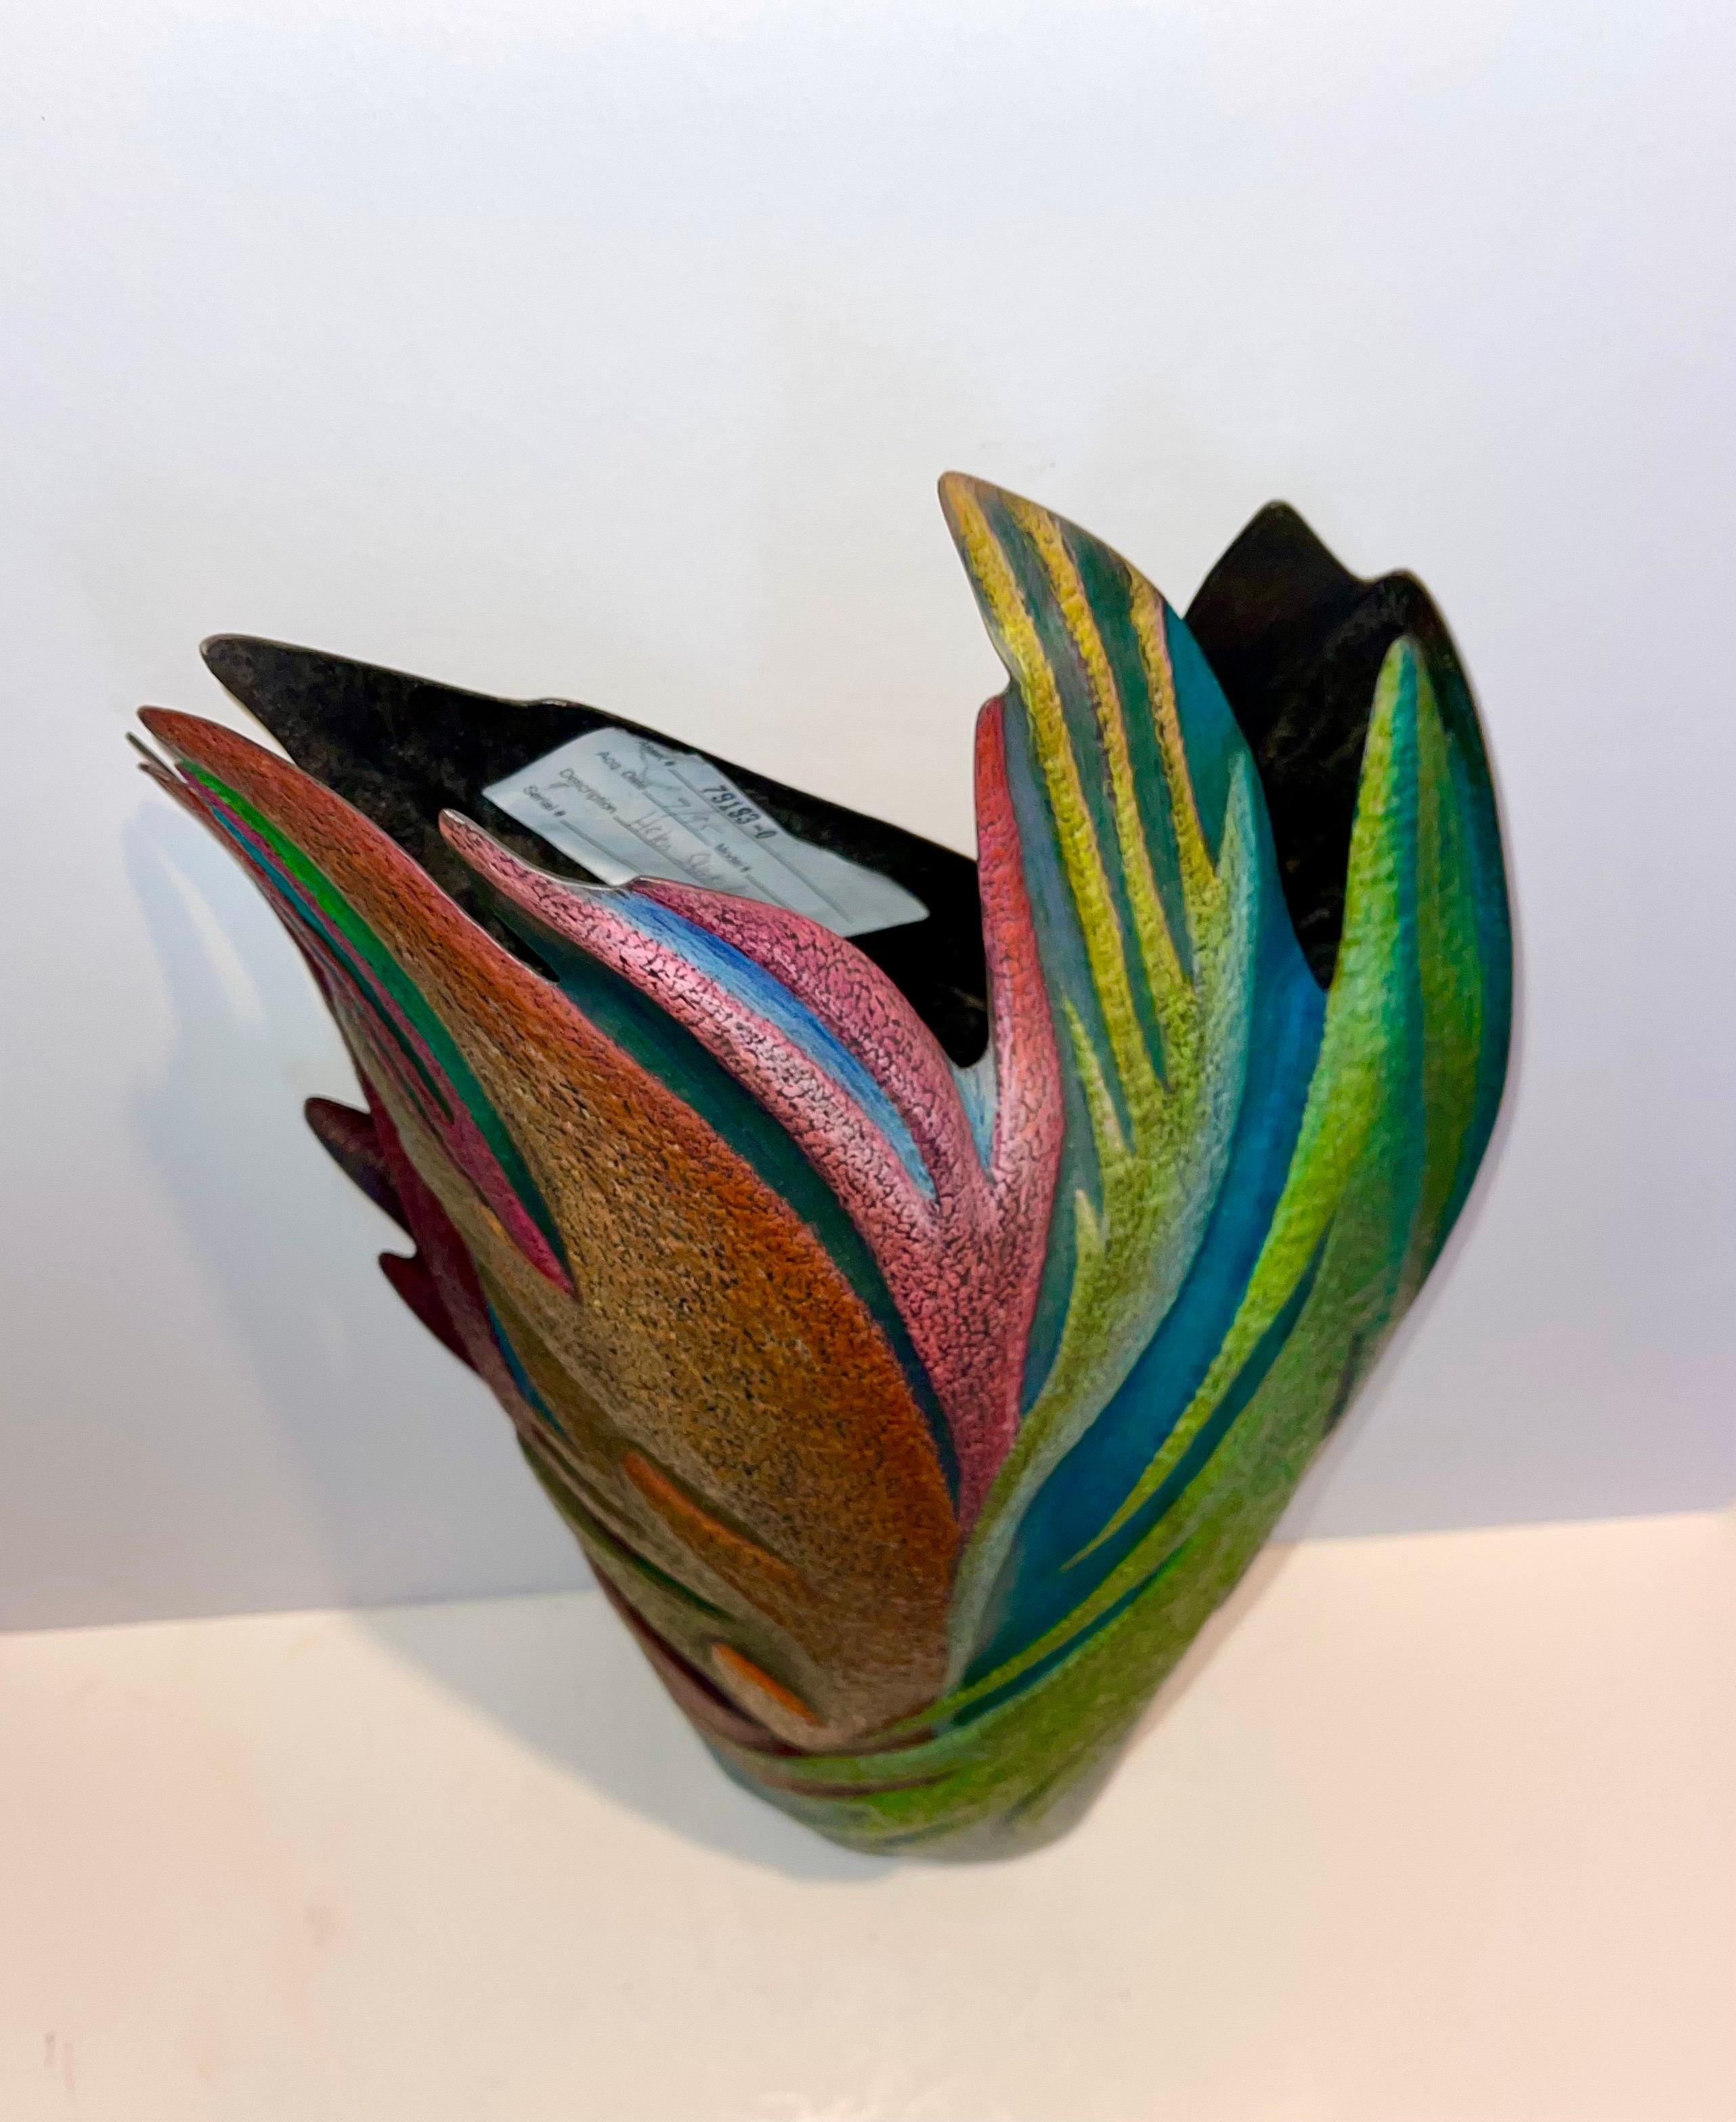 Helen Shirk Sculpture Hand Crafted Studio Vessel, Copper Patina, Colored Pencils For Sale 3